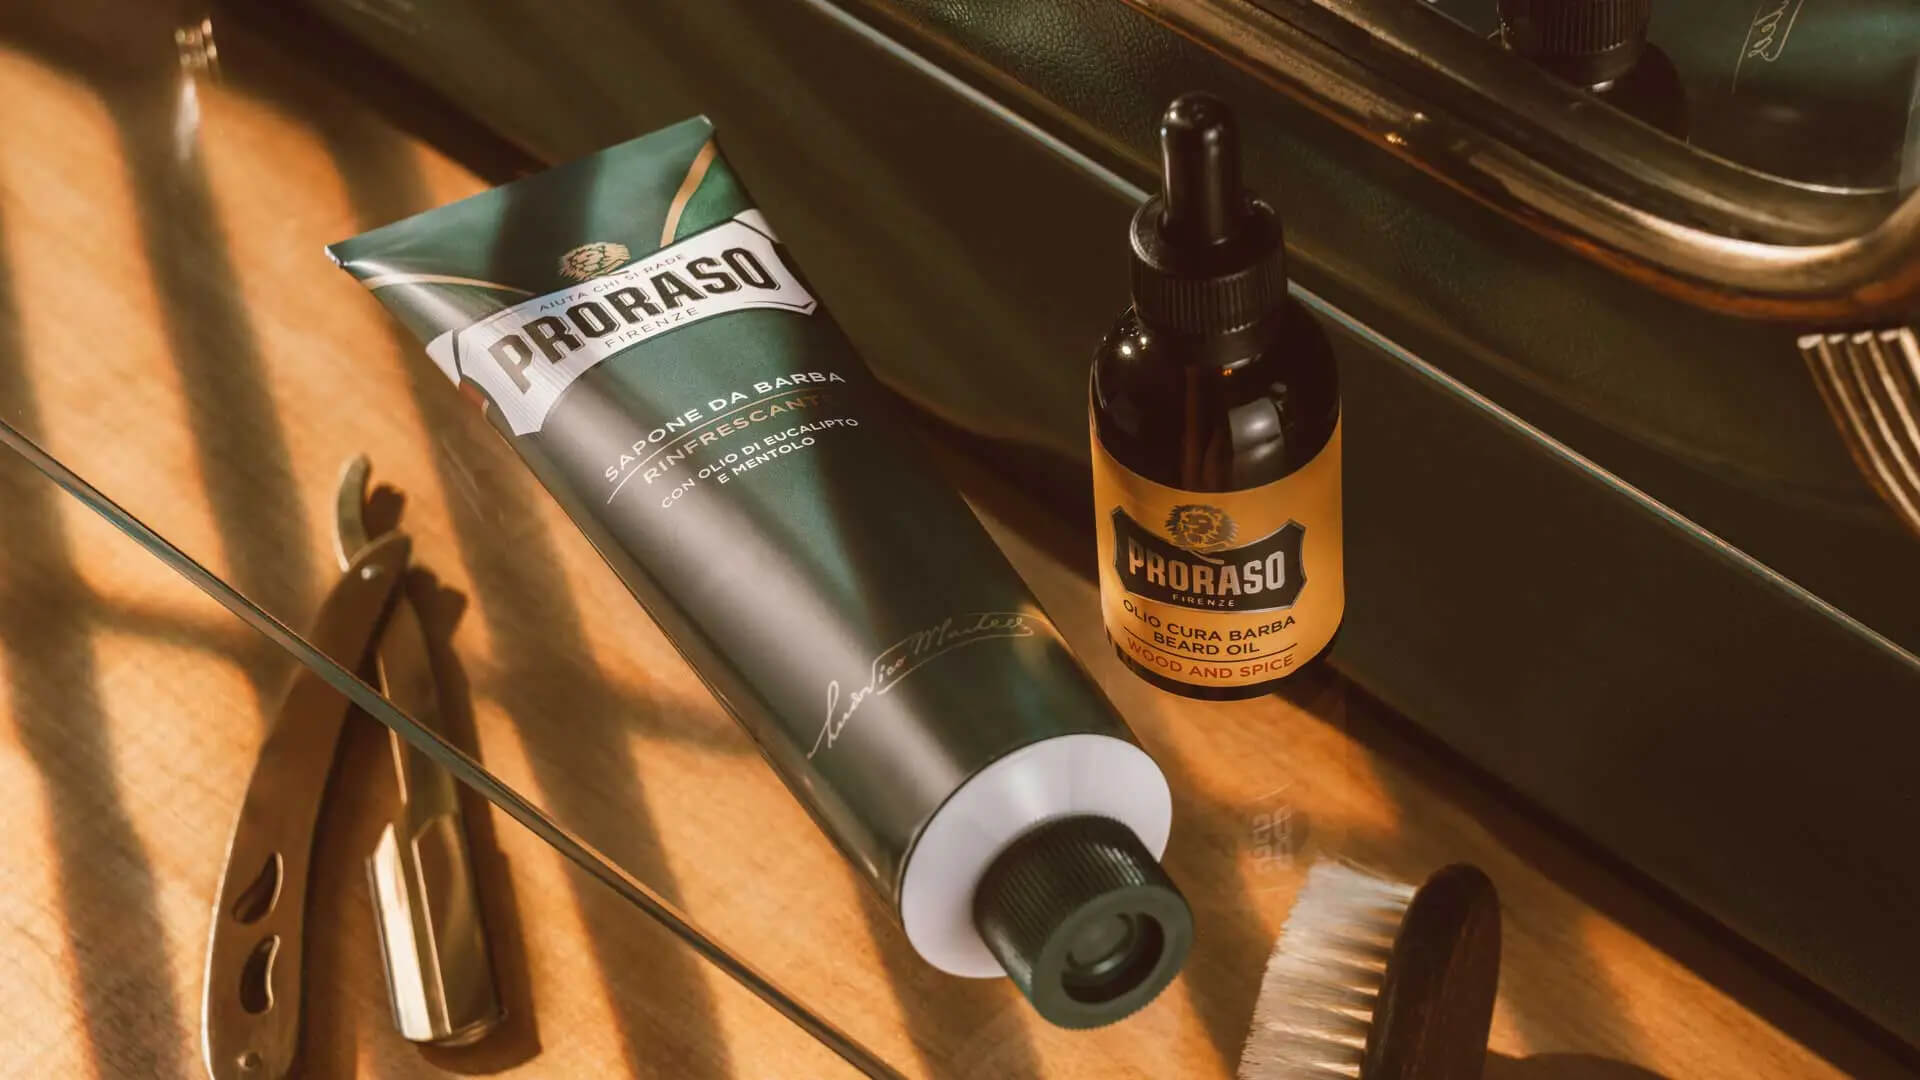  Proraso Shaving Kit for Men, Refreshing and Toning Pre-Shave  Cream, Shaving Cream Tube and After Shave Balm in Vintage Gino Tin